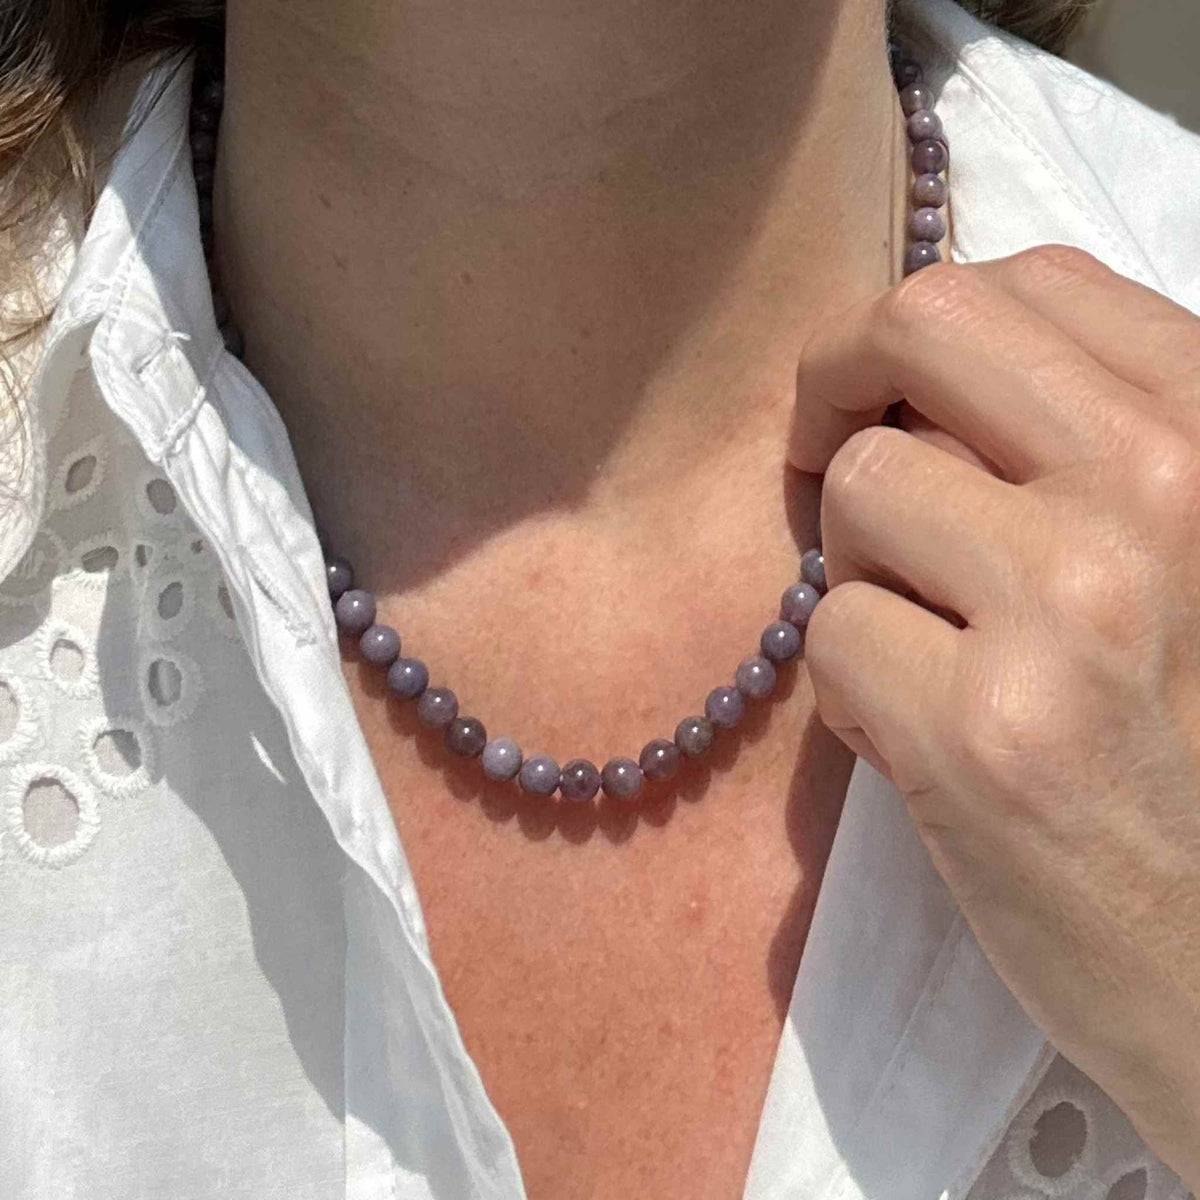 fairtrade chalcedony gemstone necklace modelled against a white dress